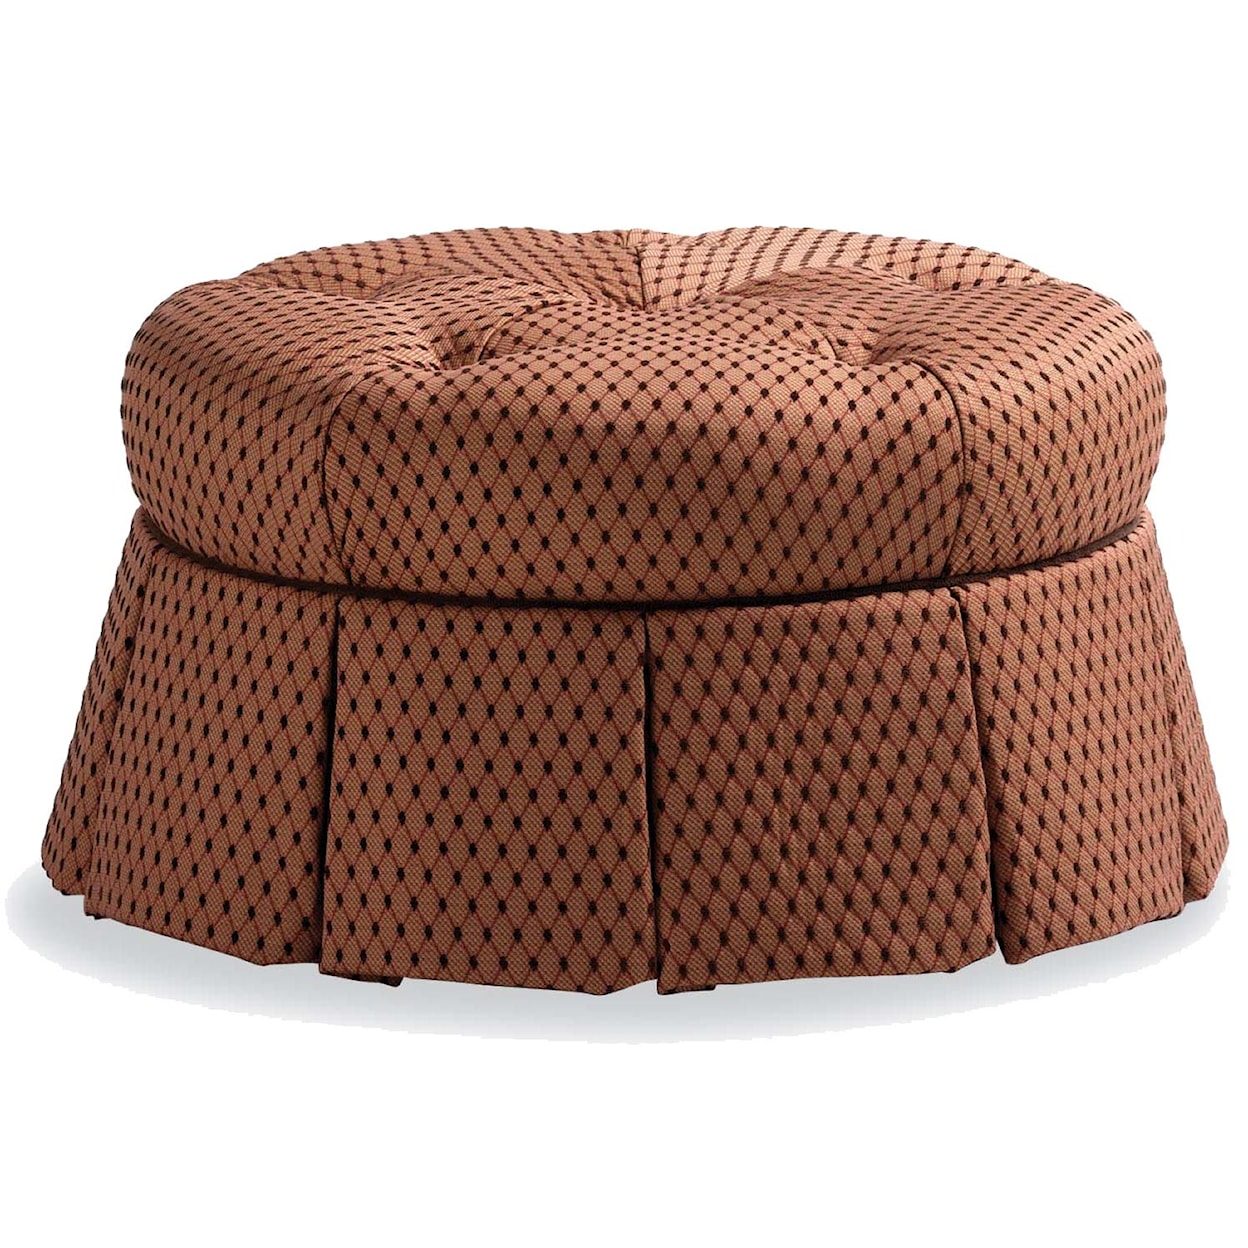 Jessica Charles Fine Upholstered Accents Round Ottoman   